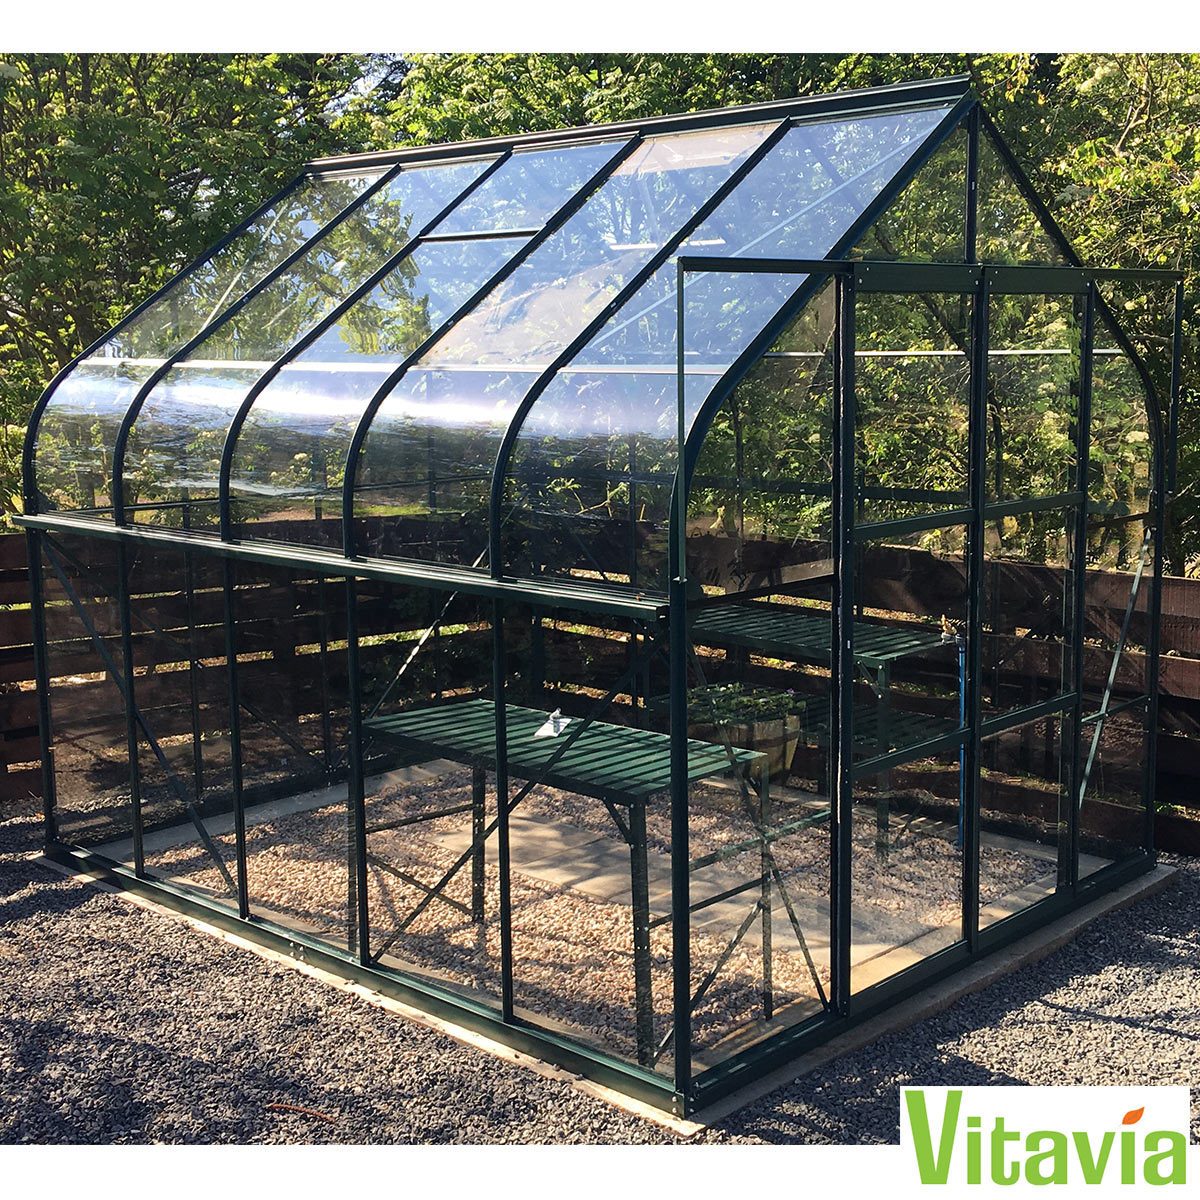 Vitavia Colorado 8300 8ft 4" x 10ft 6" (2.6 x 3.2 m) Greenhouse Package Garden Power Tools Costco UK Color  